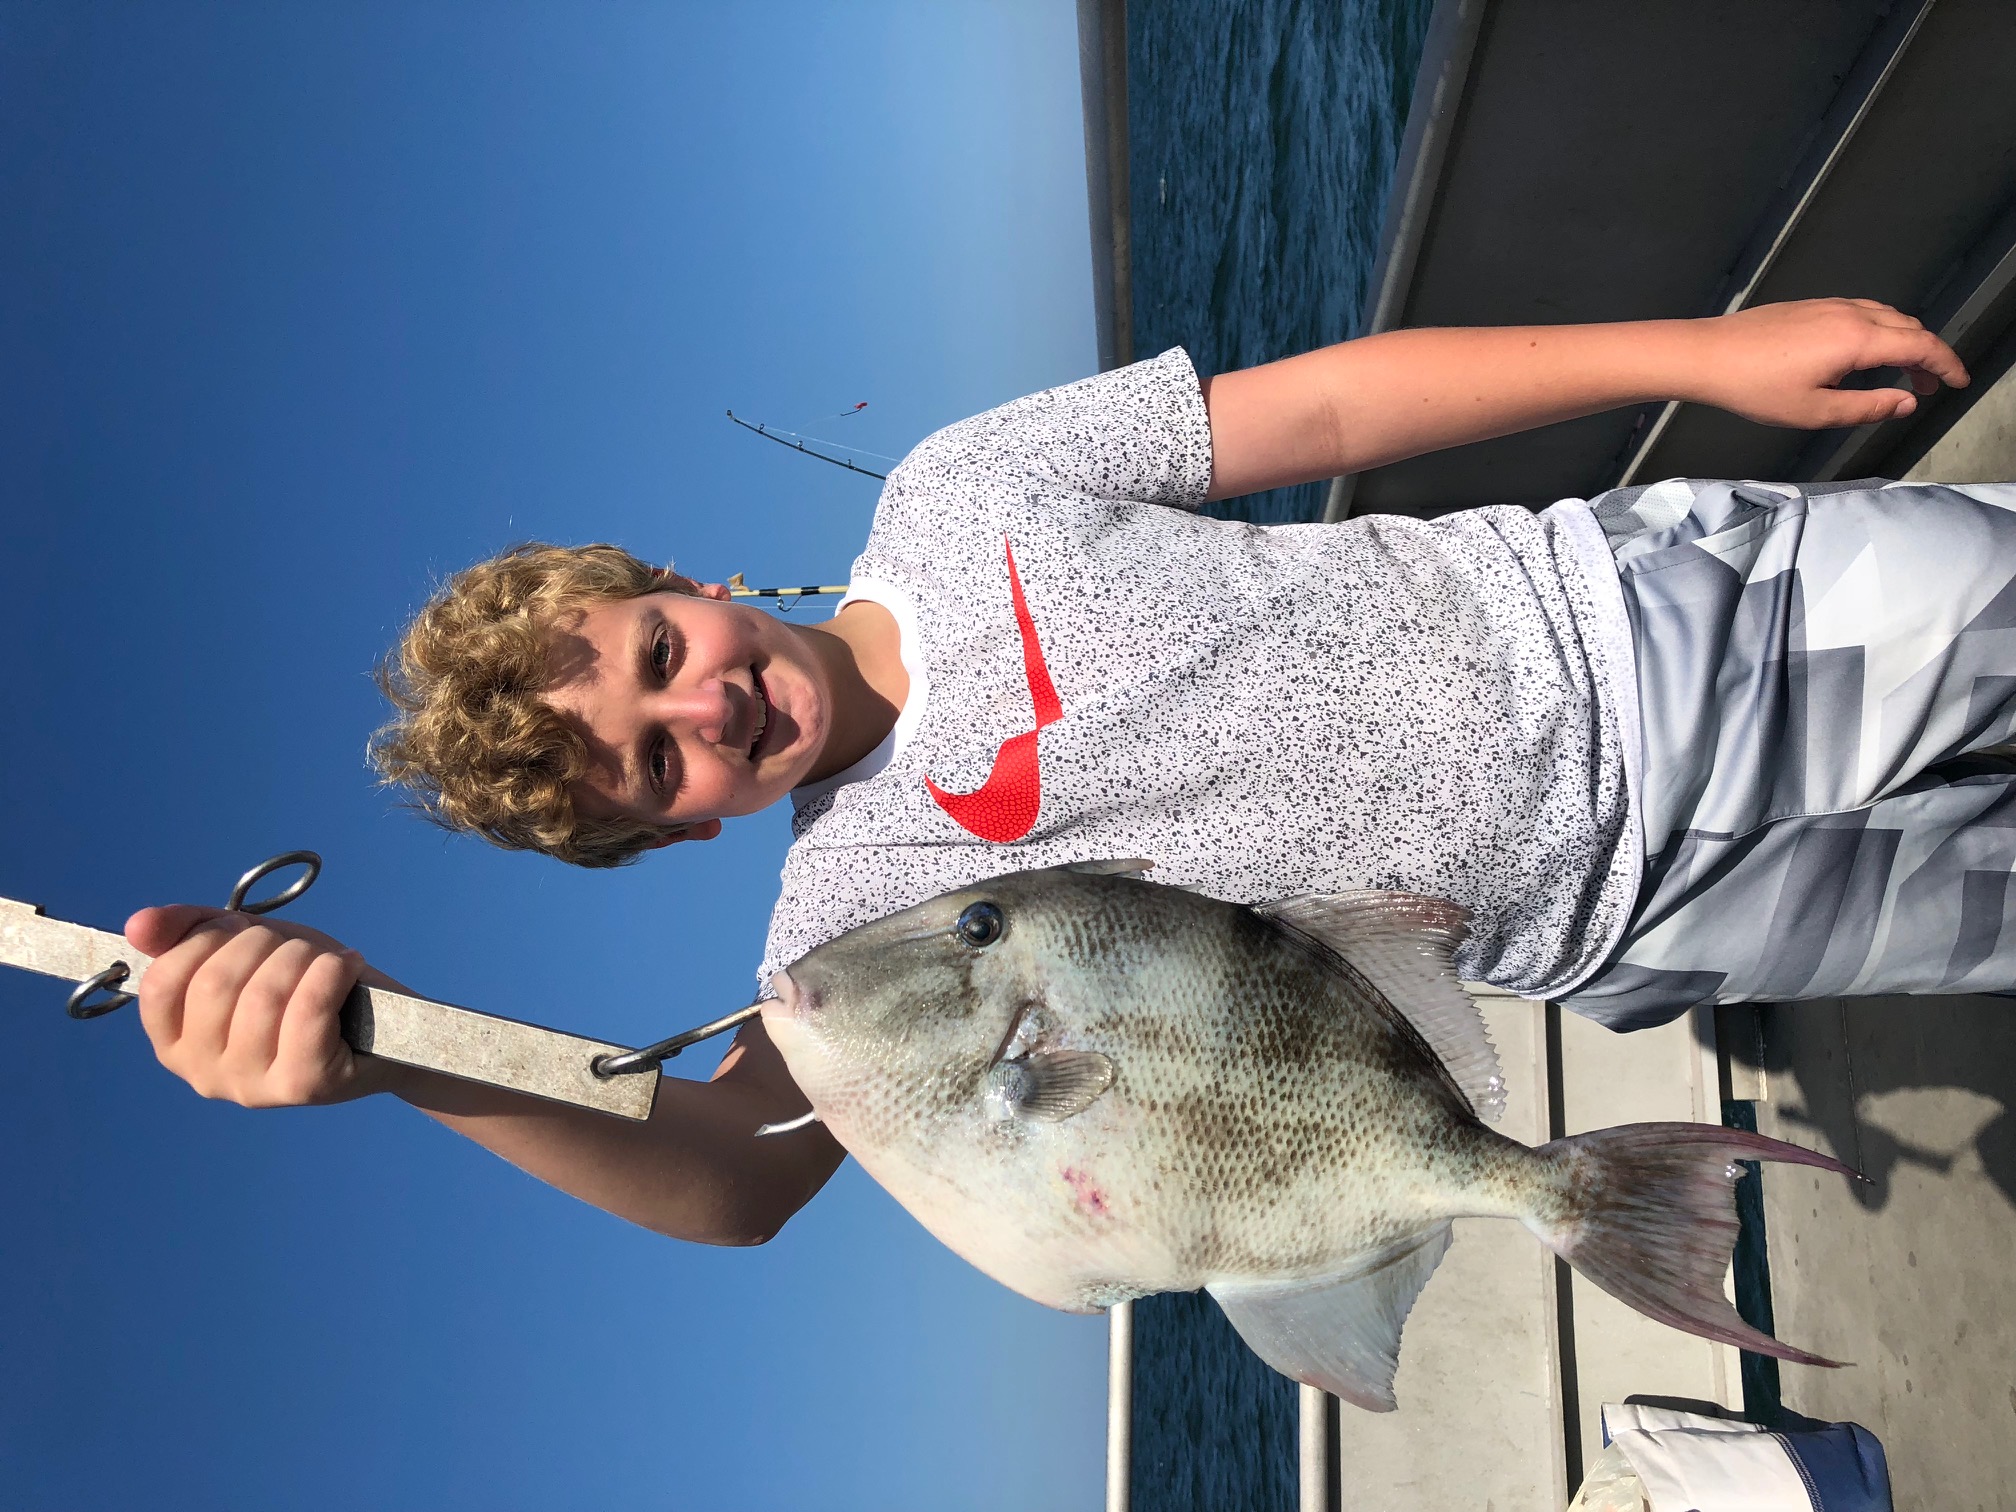 Tasty Triggerfish caught off of Wildwood Crest, New Jersey